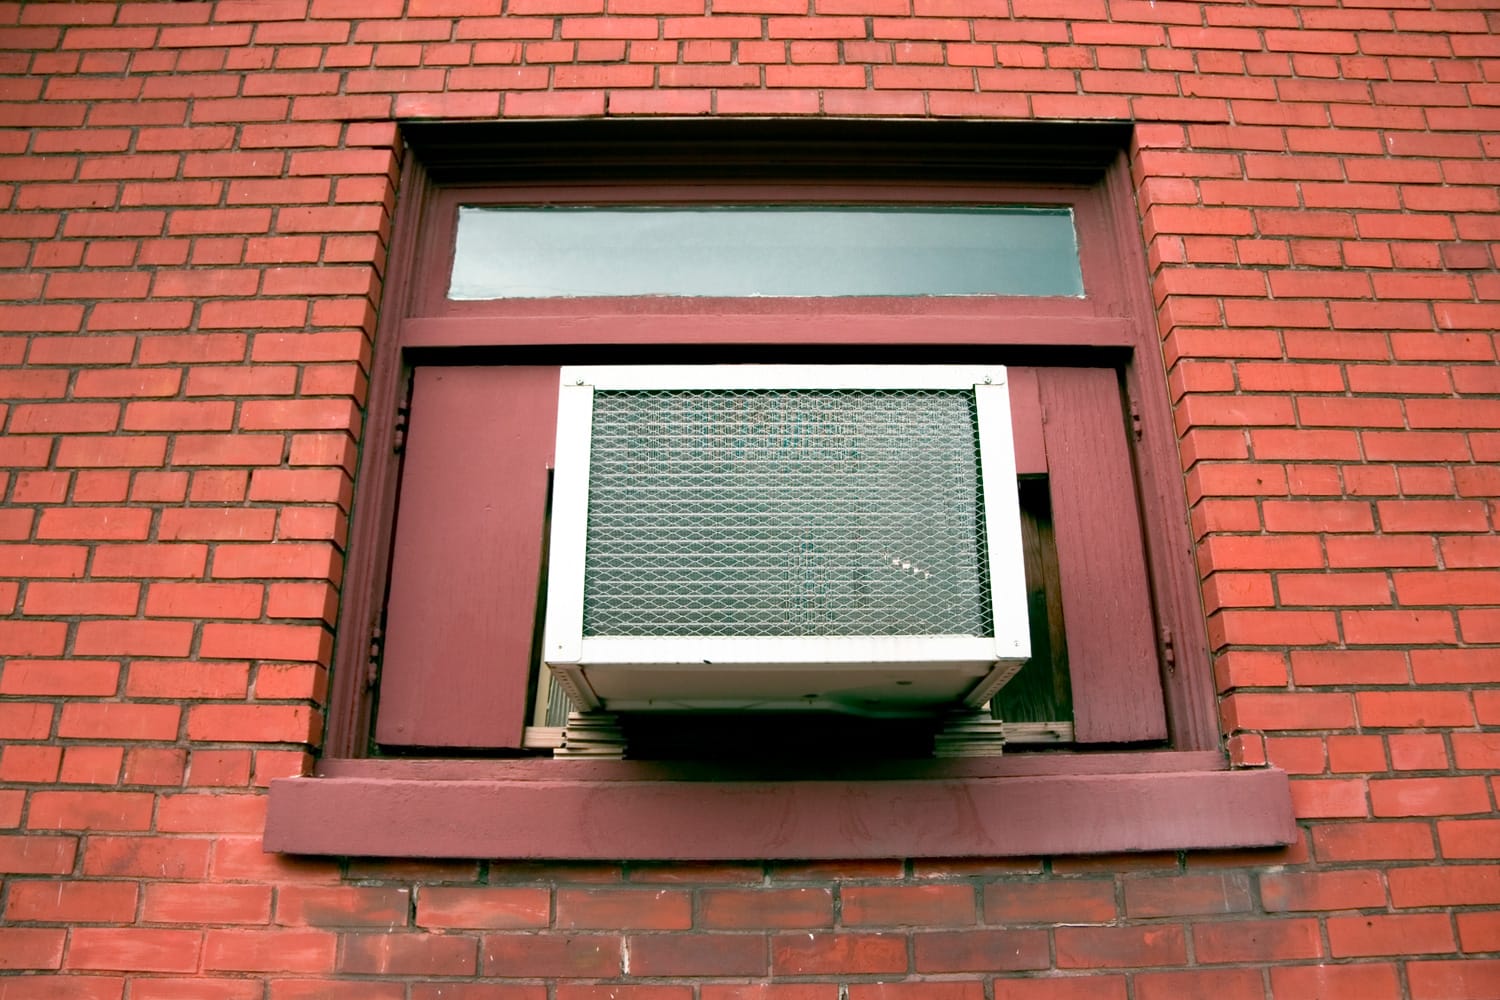 A small air conditioner in the window of a brick apartment building.